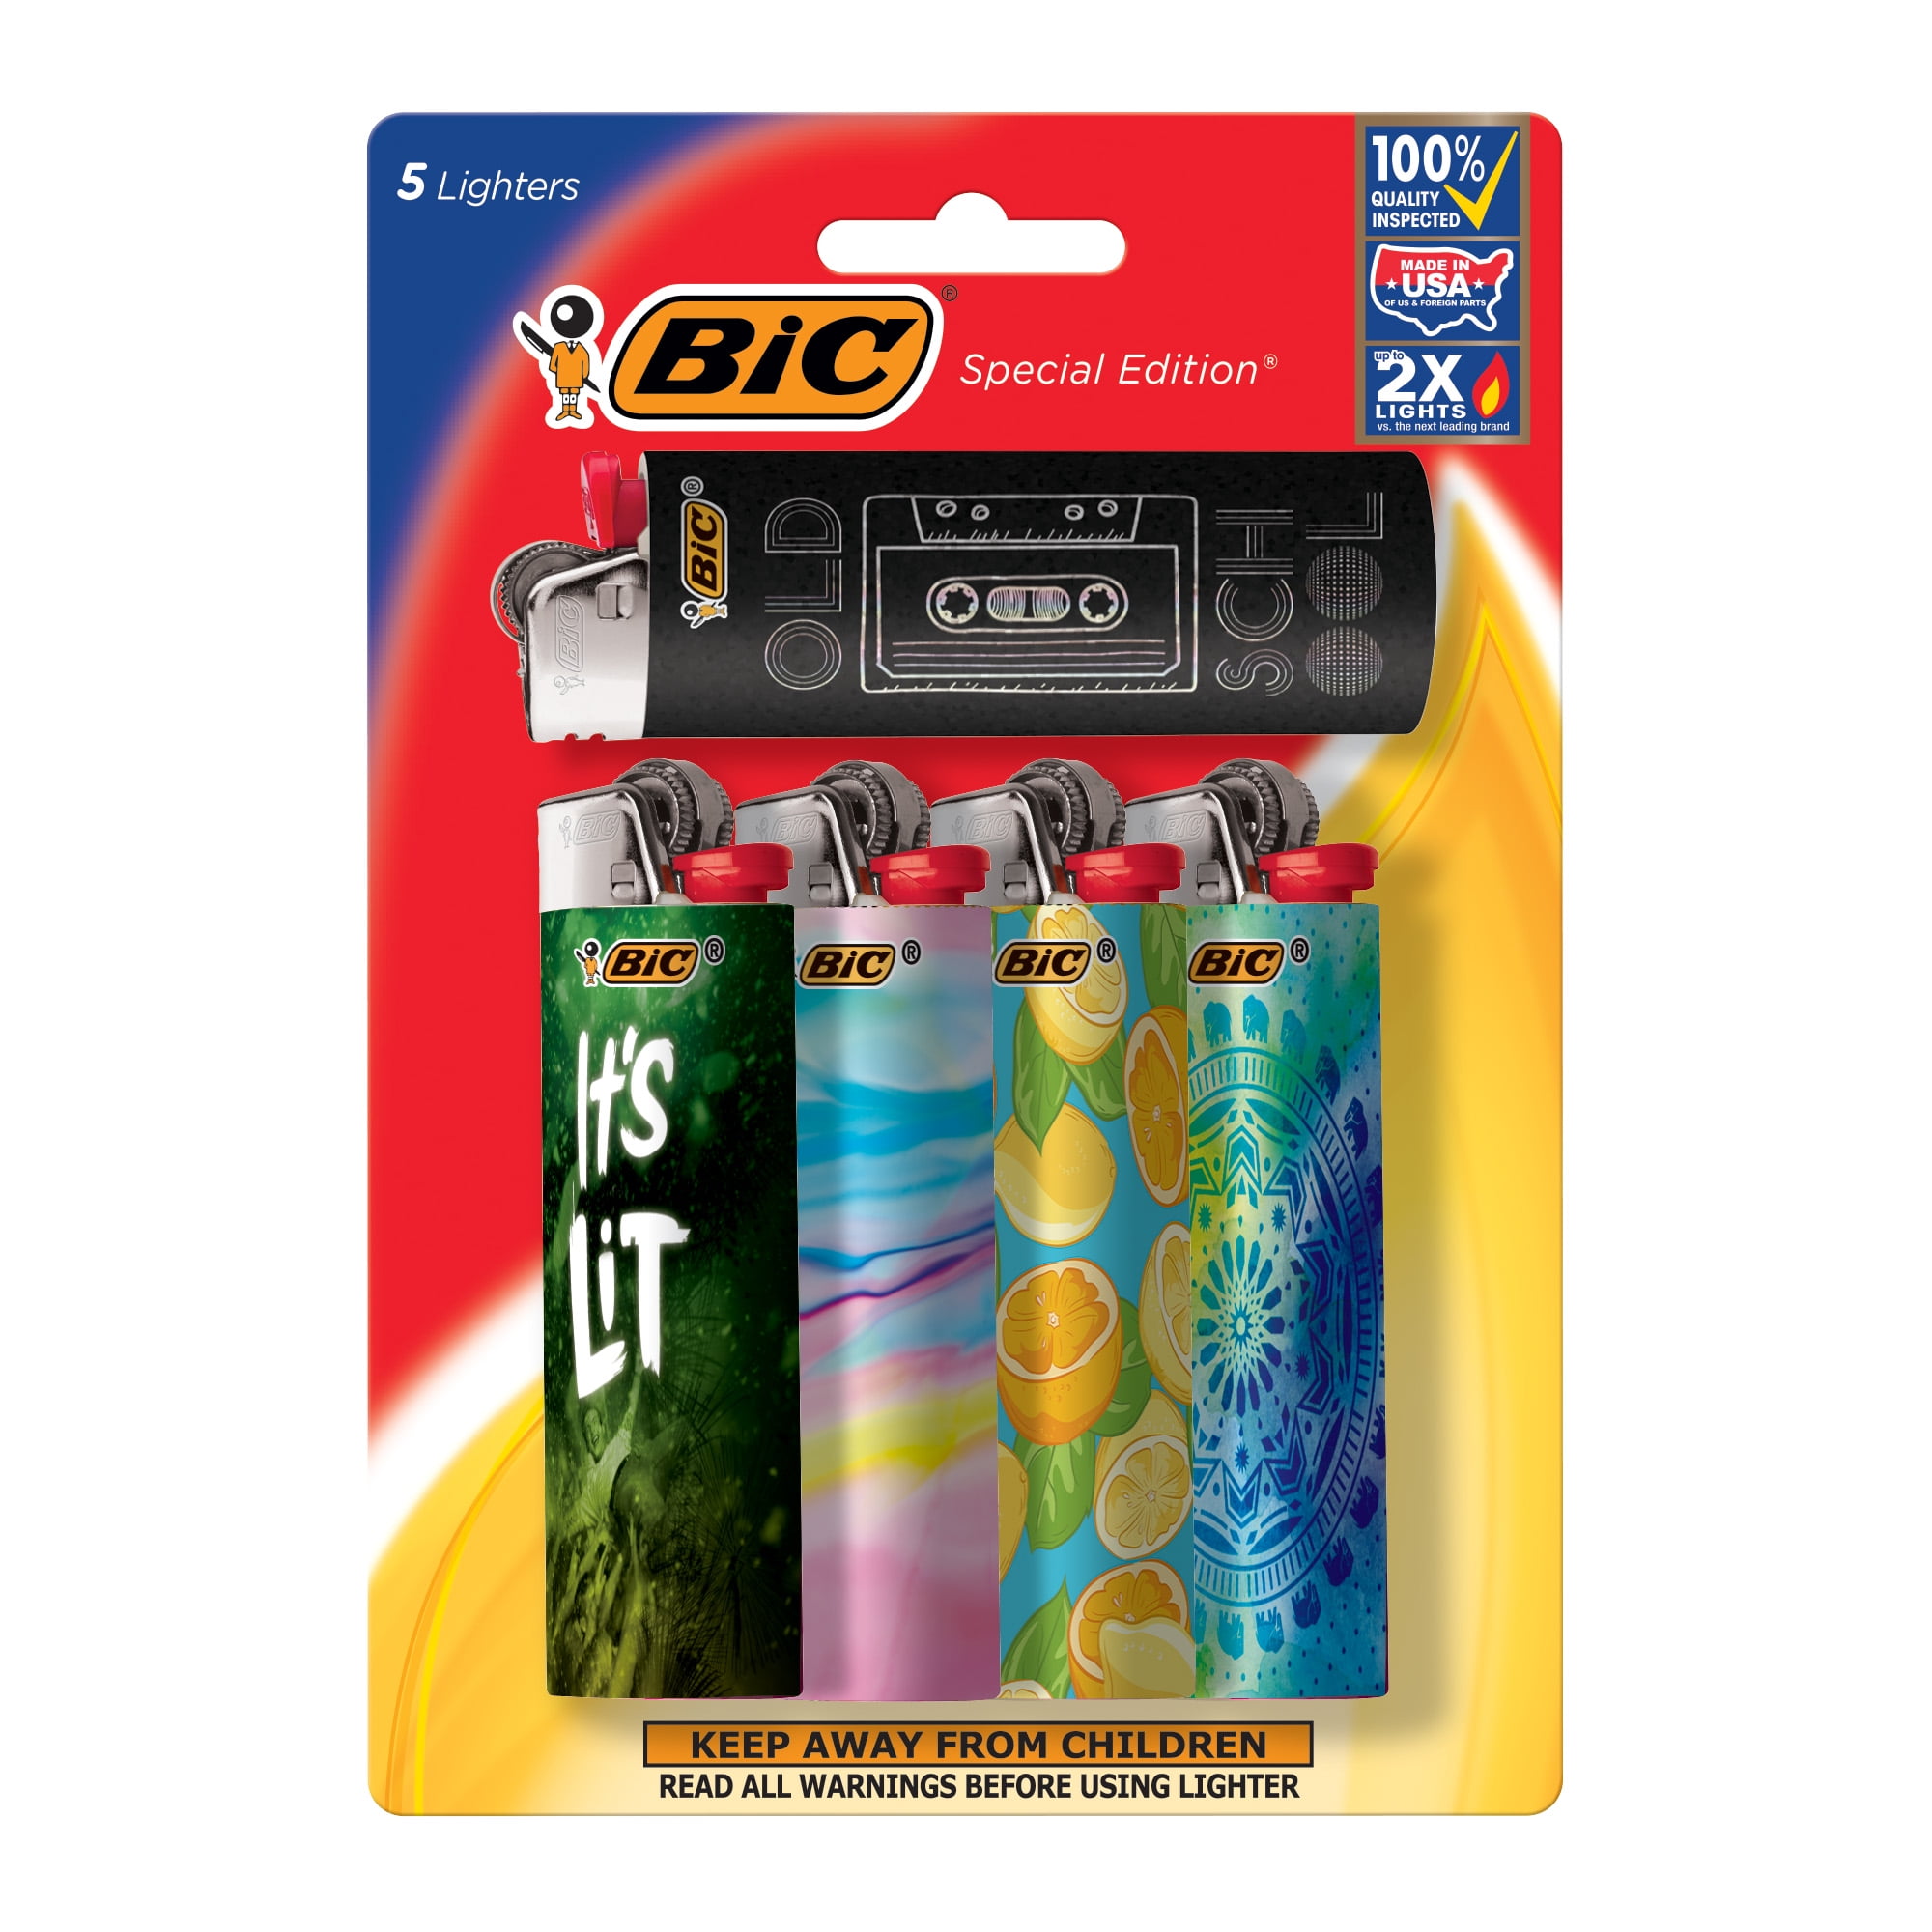 BIC Special Edition Pocket Lighter, Favorites Series - Pack of 5 Lighters (Designs May Vary)